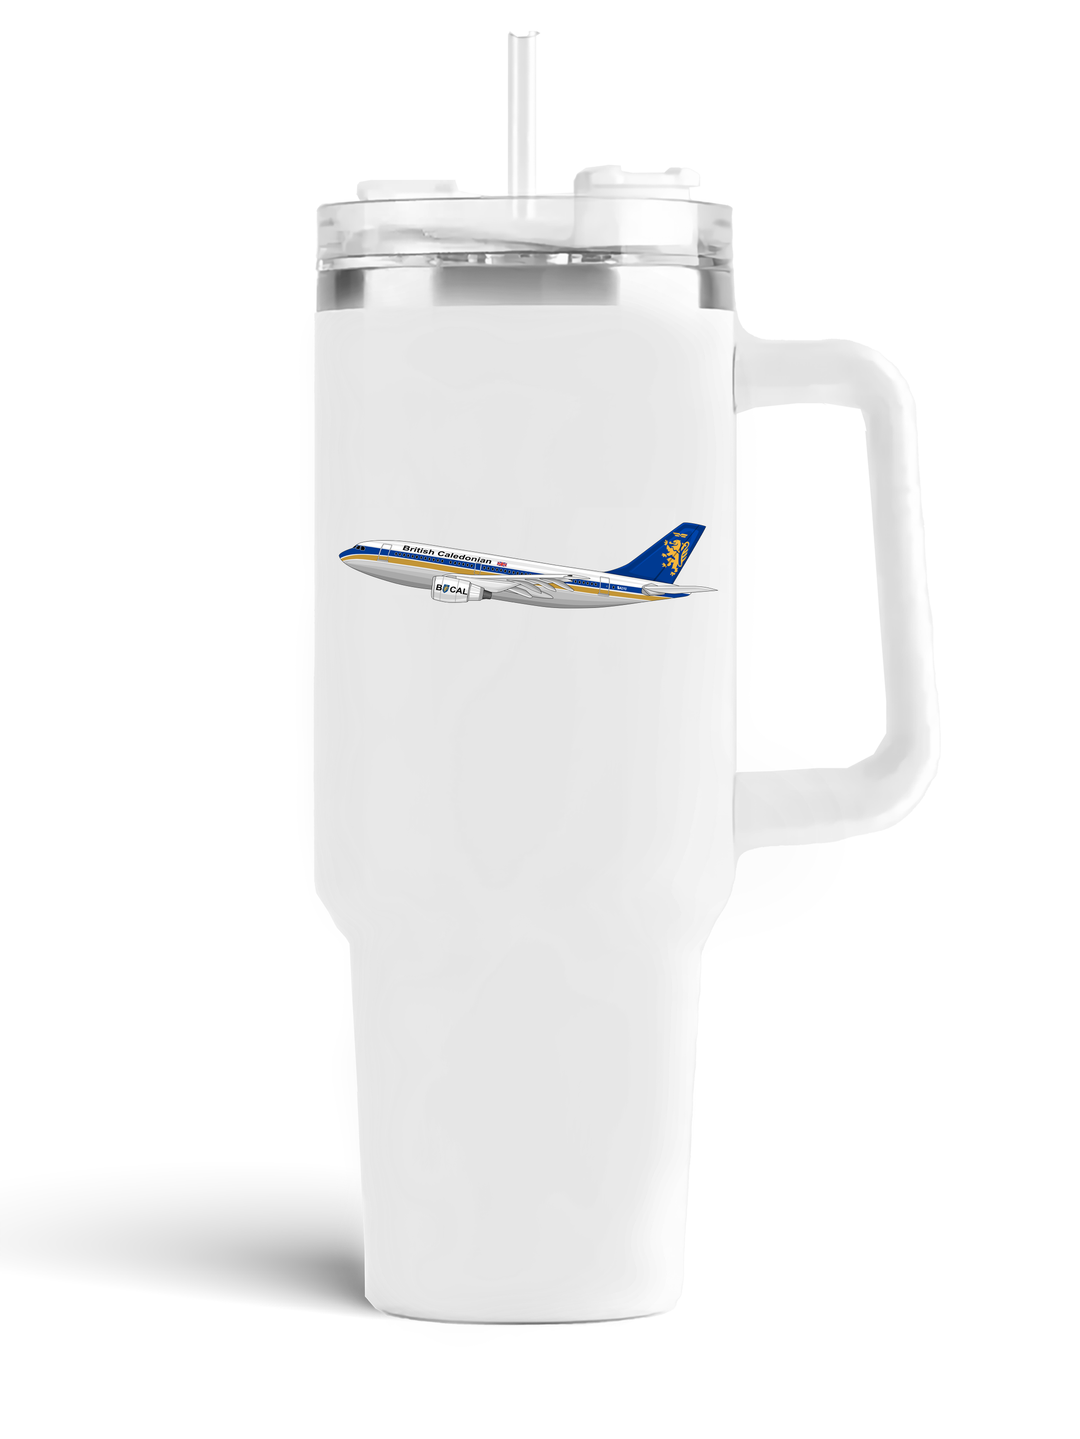 British Caledonian Airbus A310 quencher